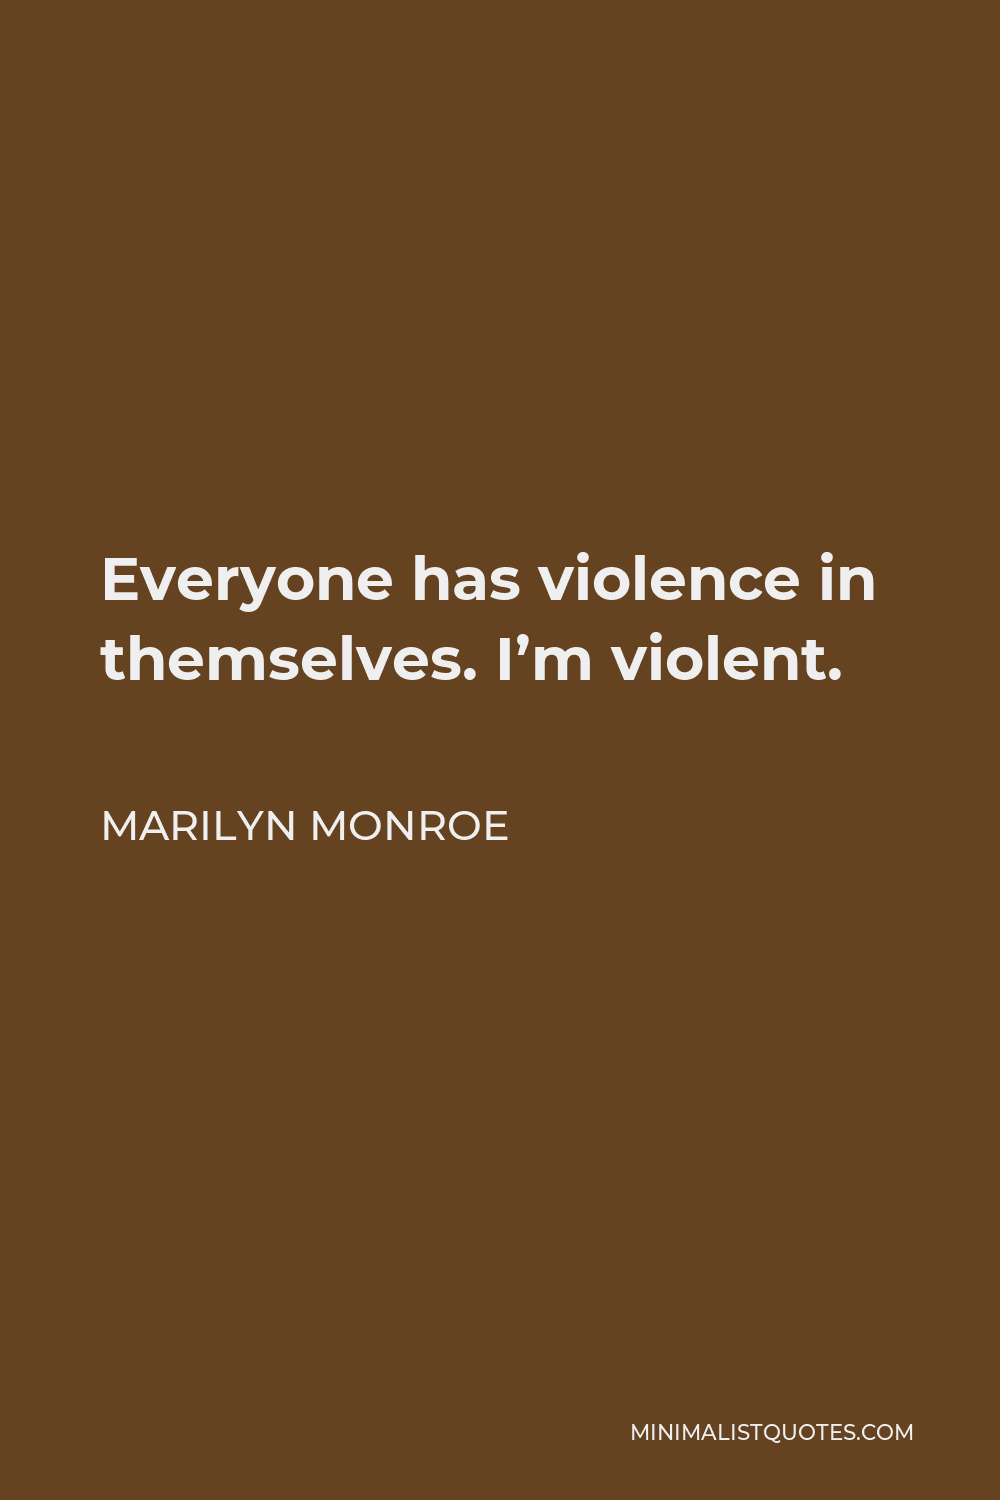 Marilyn Monroe Quote - Everyone has violence in themselves. I’m violent.